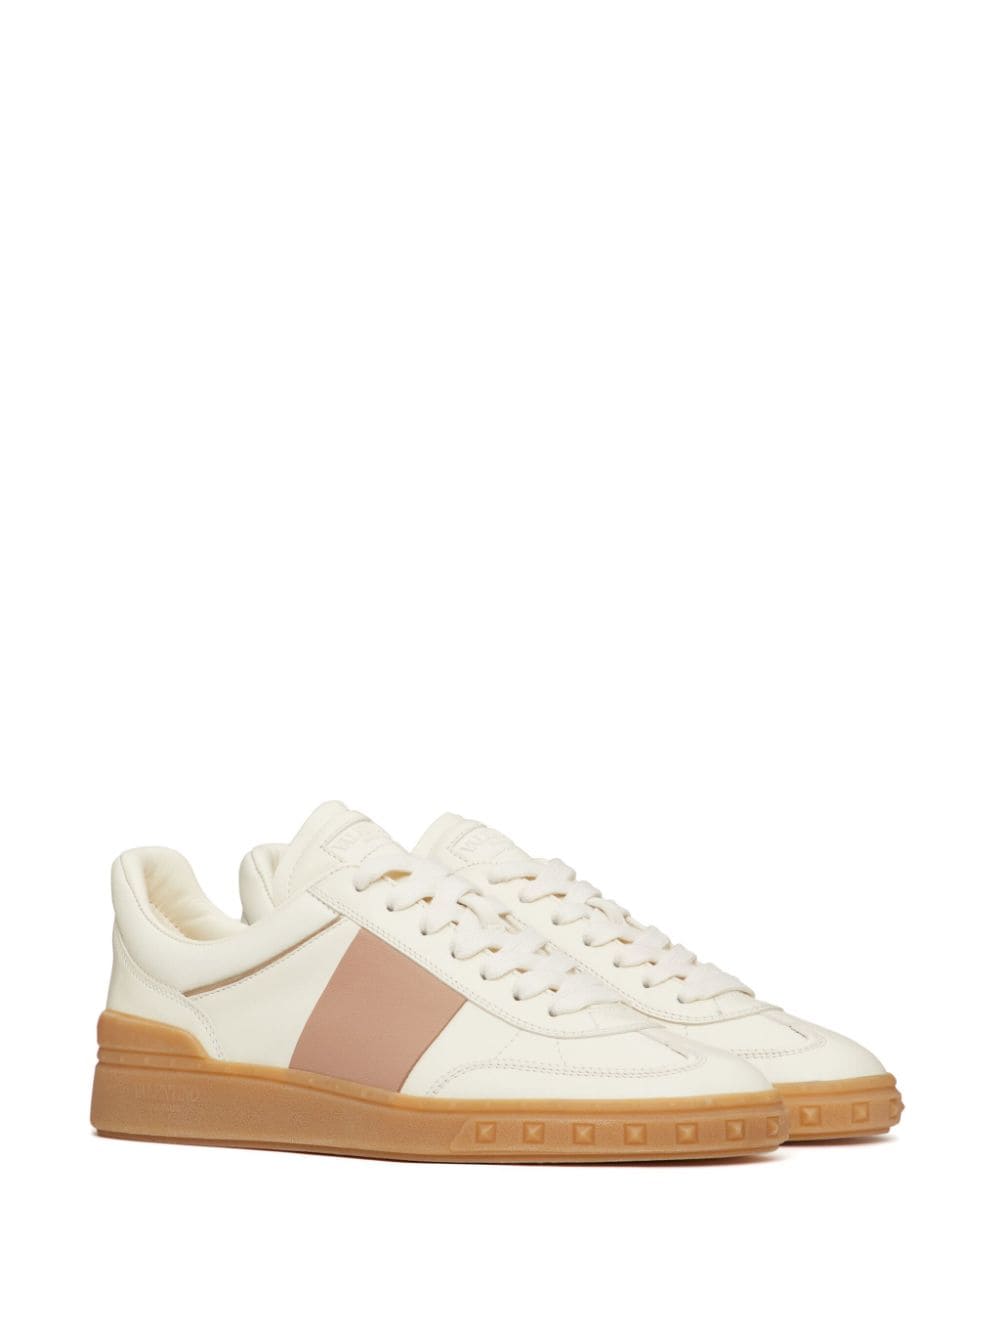 Upvillage low-top leather sneakers<BR/><BR/><BR/>